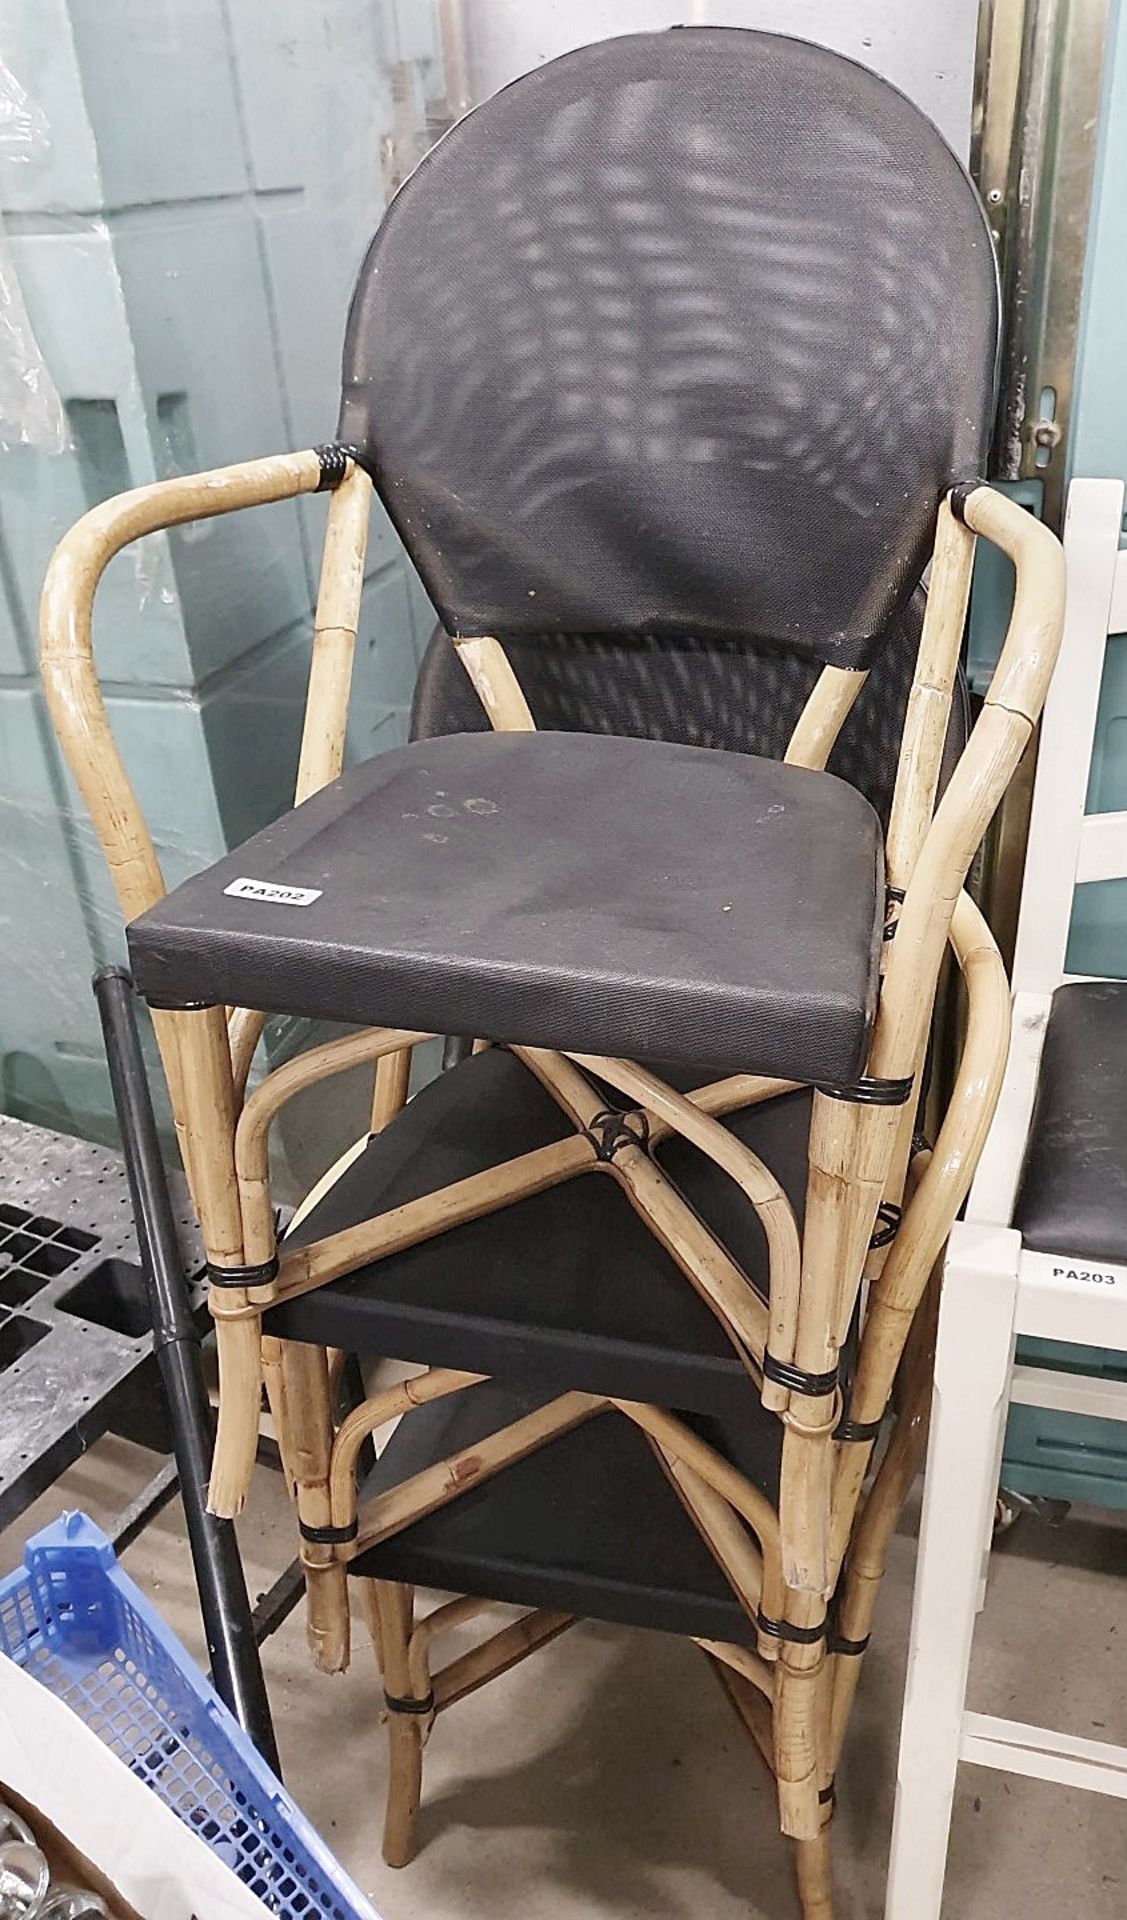 6 x Bamboo Studio Chairs With Black Seat and Back Rest - Features the Name 'PAUL' Printed on the